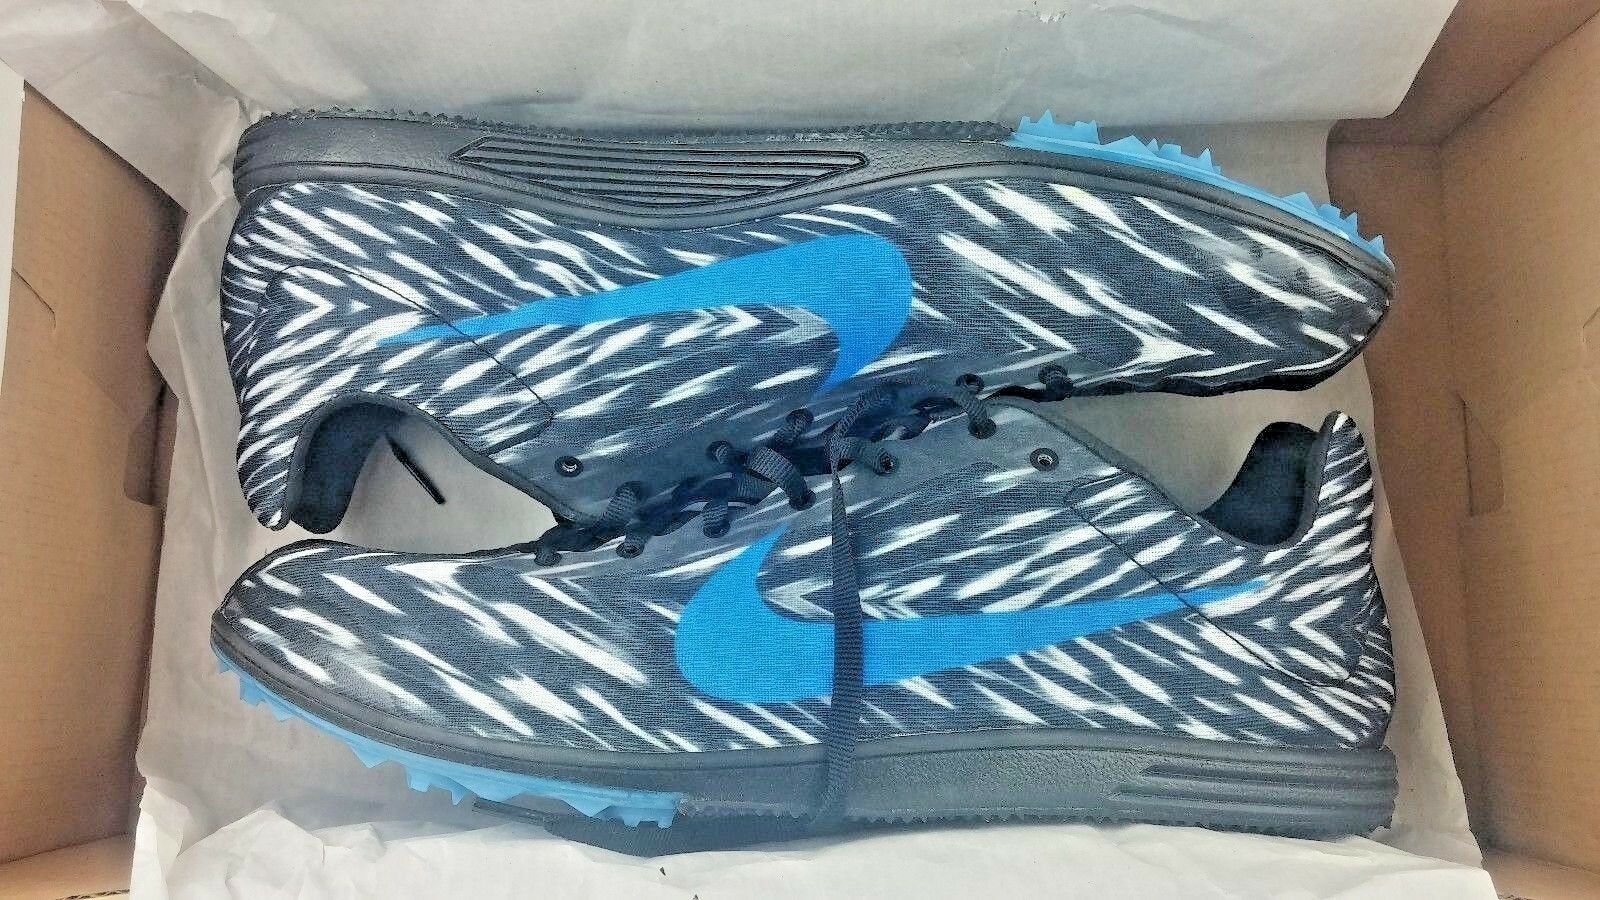 Nike Track Shoes Zoom Rival D8 Unisex Men's Size 12.5 Running Spikes Distance